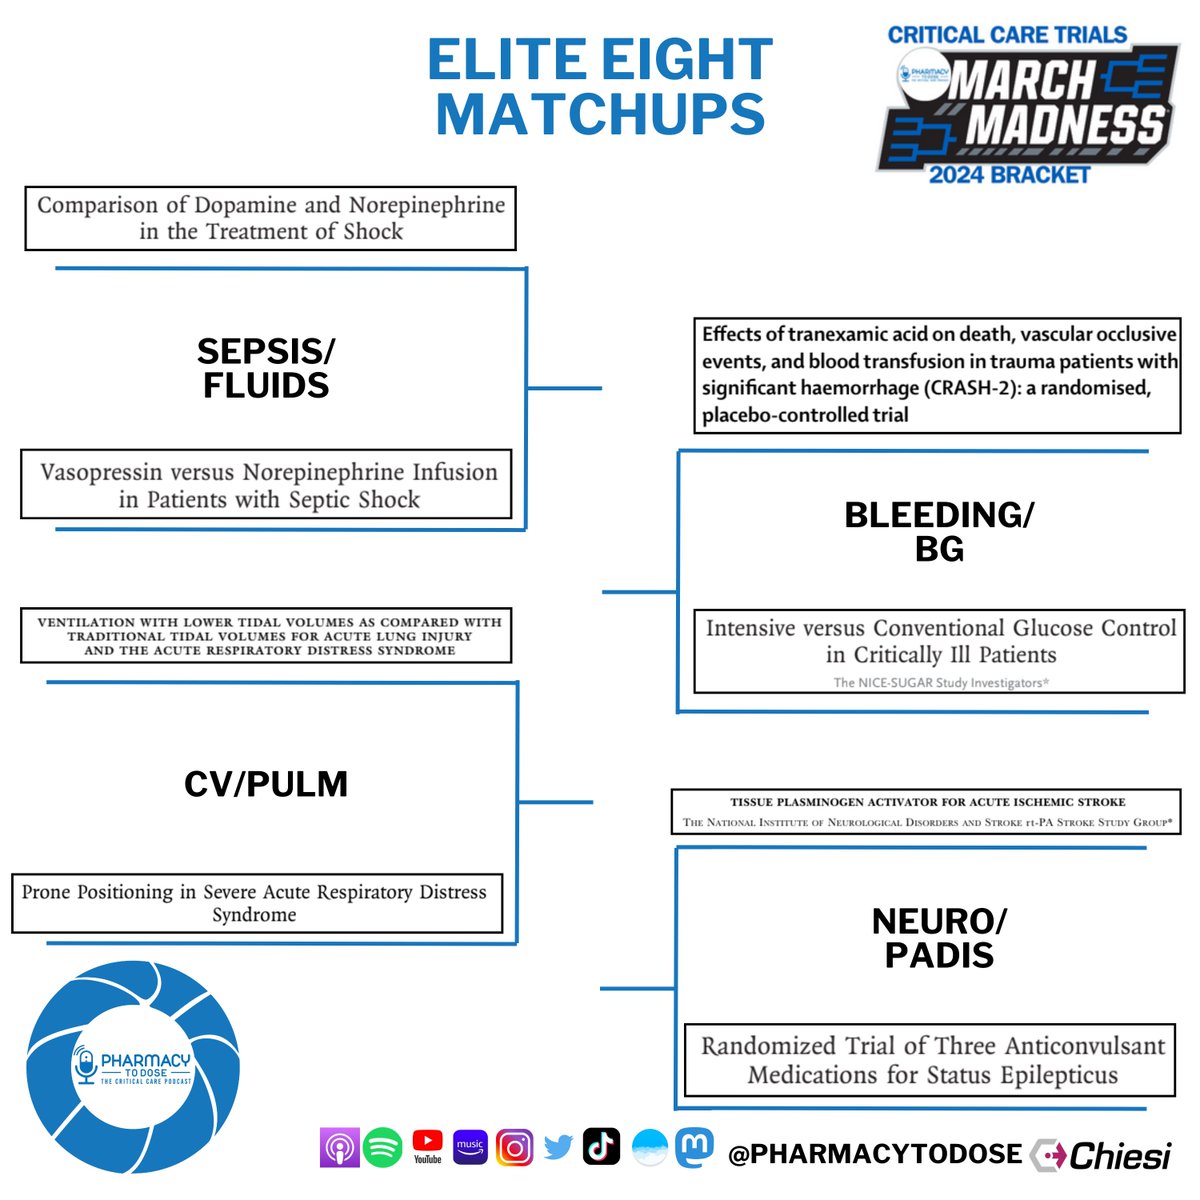 The Elite Eight is here! 8⃣ 4 incredible matchups to determine the Final Four in the 2024 Critical Care Trials March Madness bracket 🏀 Voting starts now in the 🧵 below: